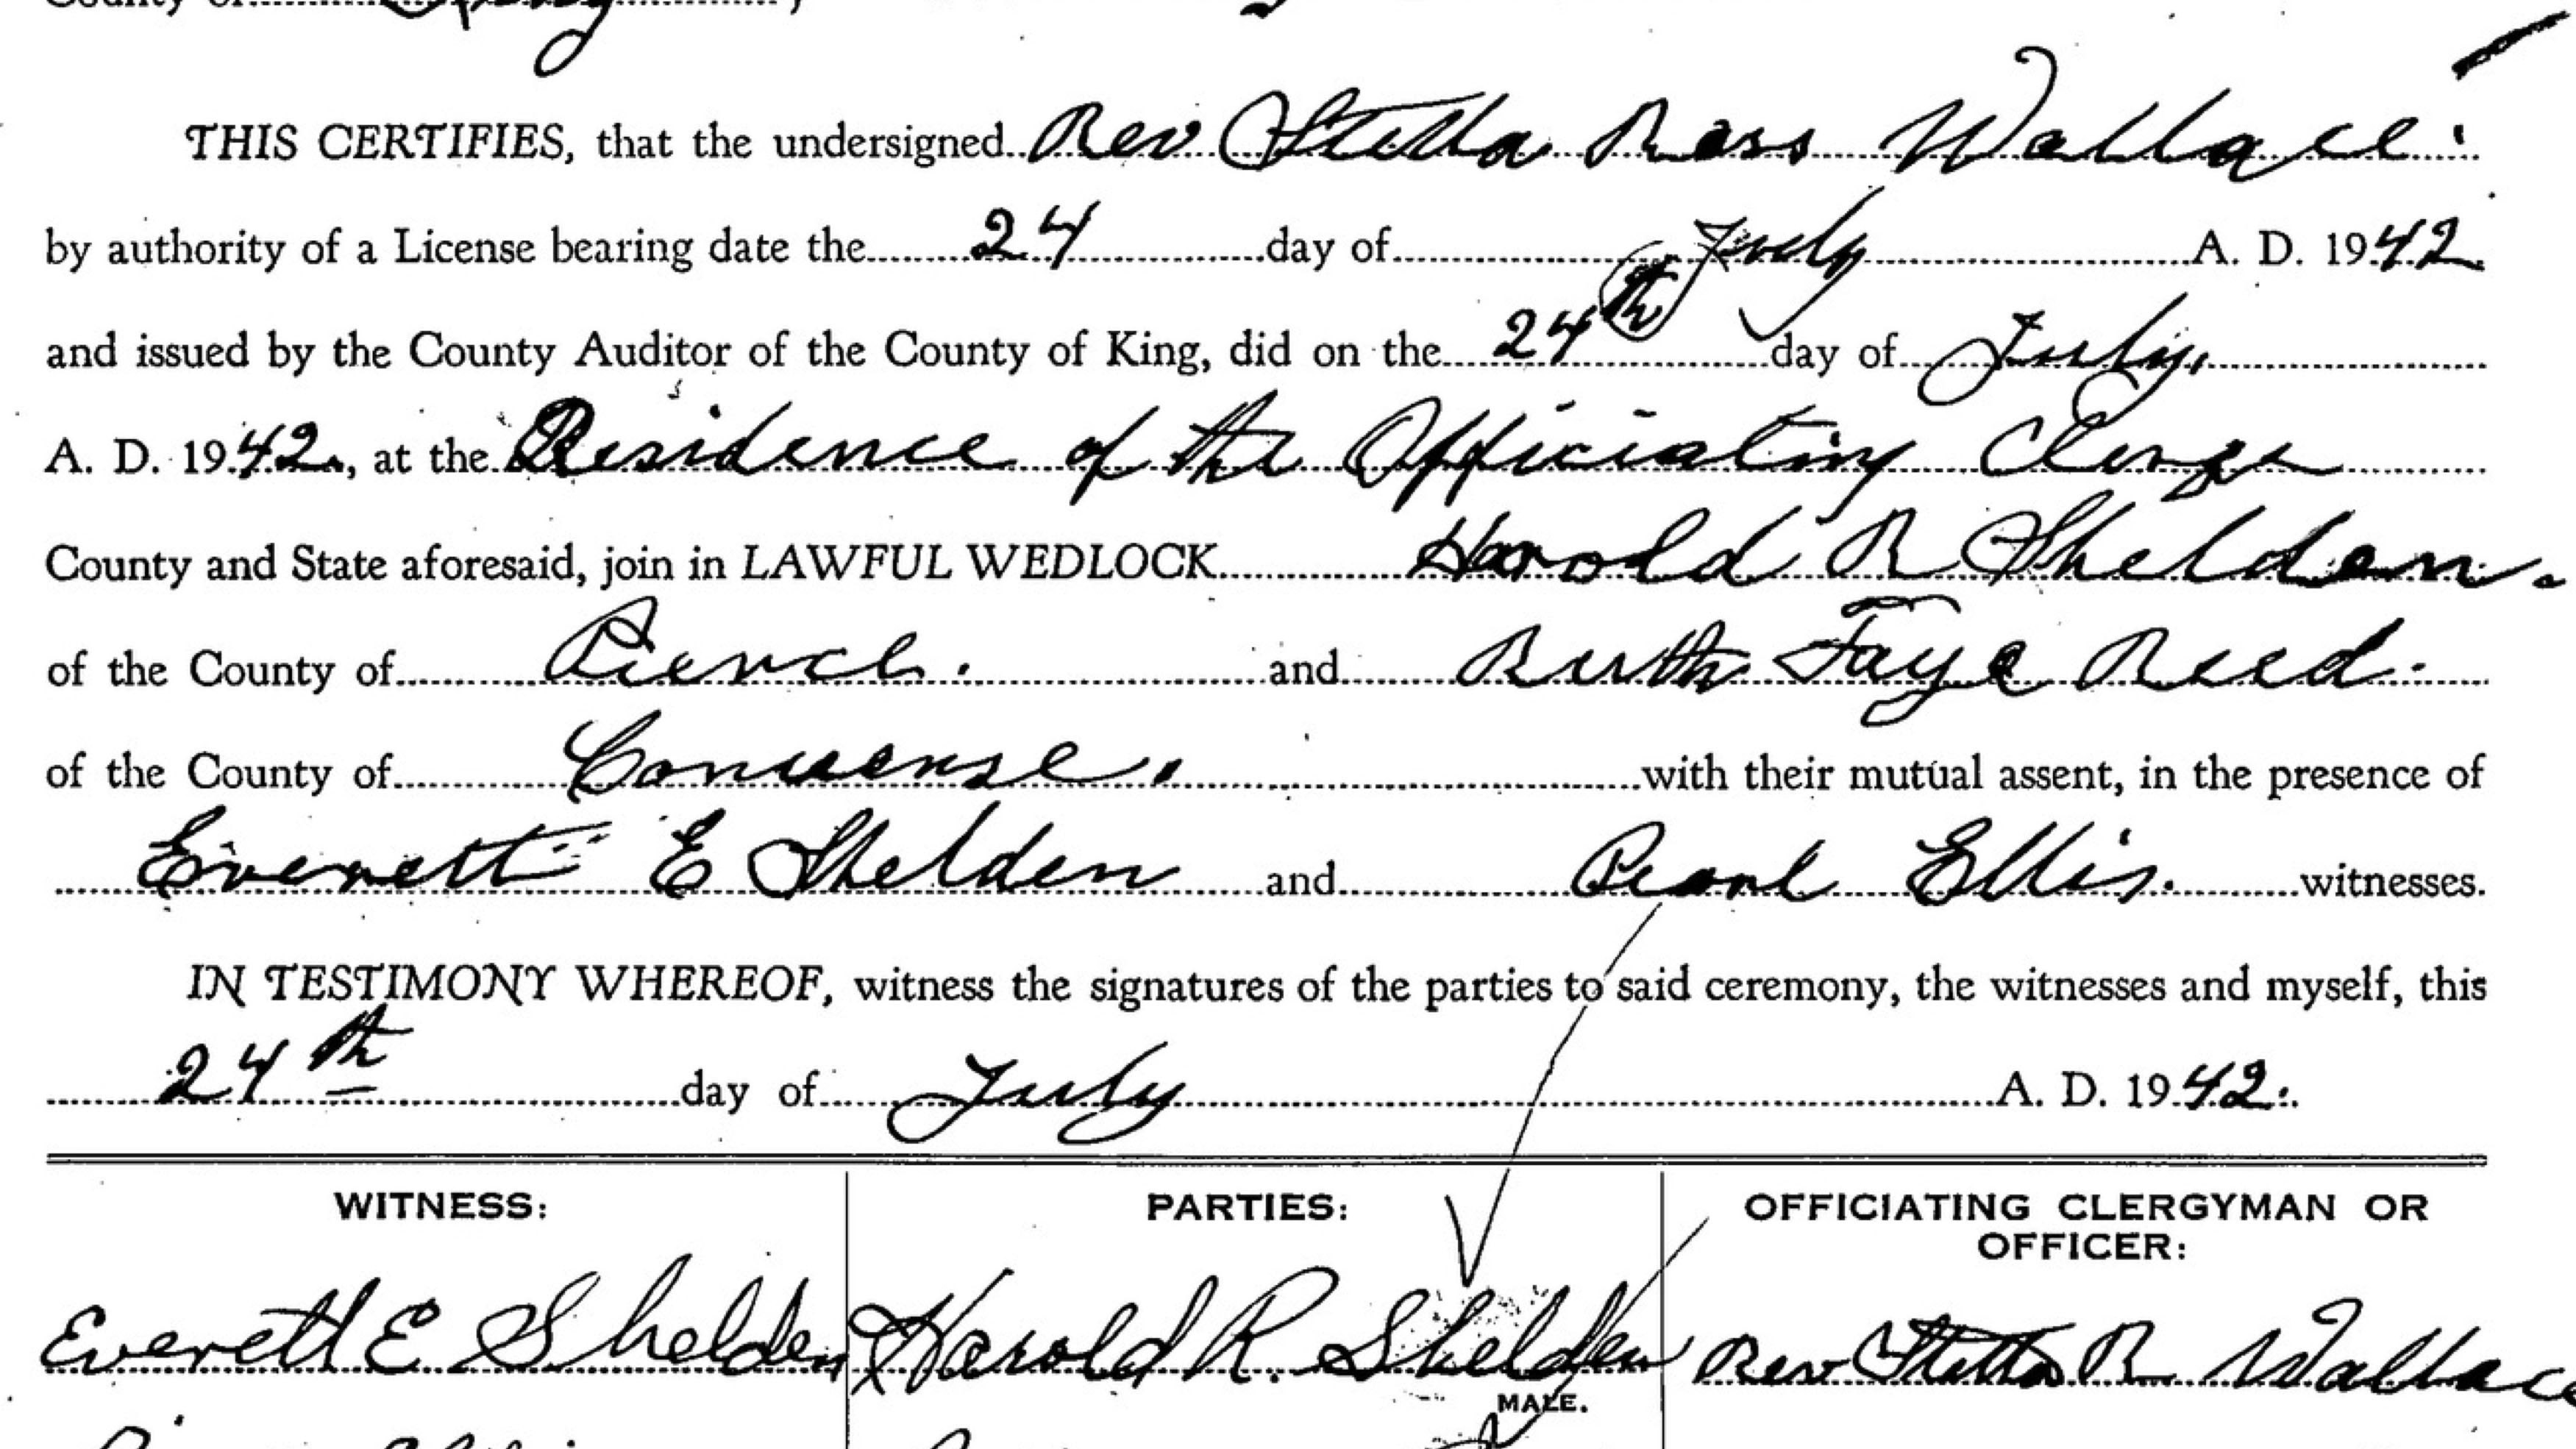 Marriage certificate in King’s County Washington for Harold Shelden and Ruth Reed shows they were married on July 24, 1942.